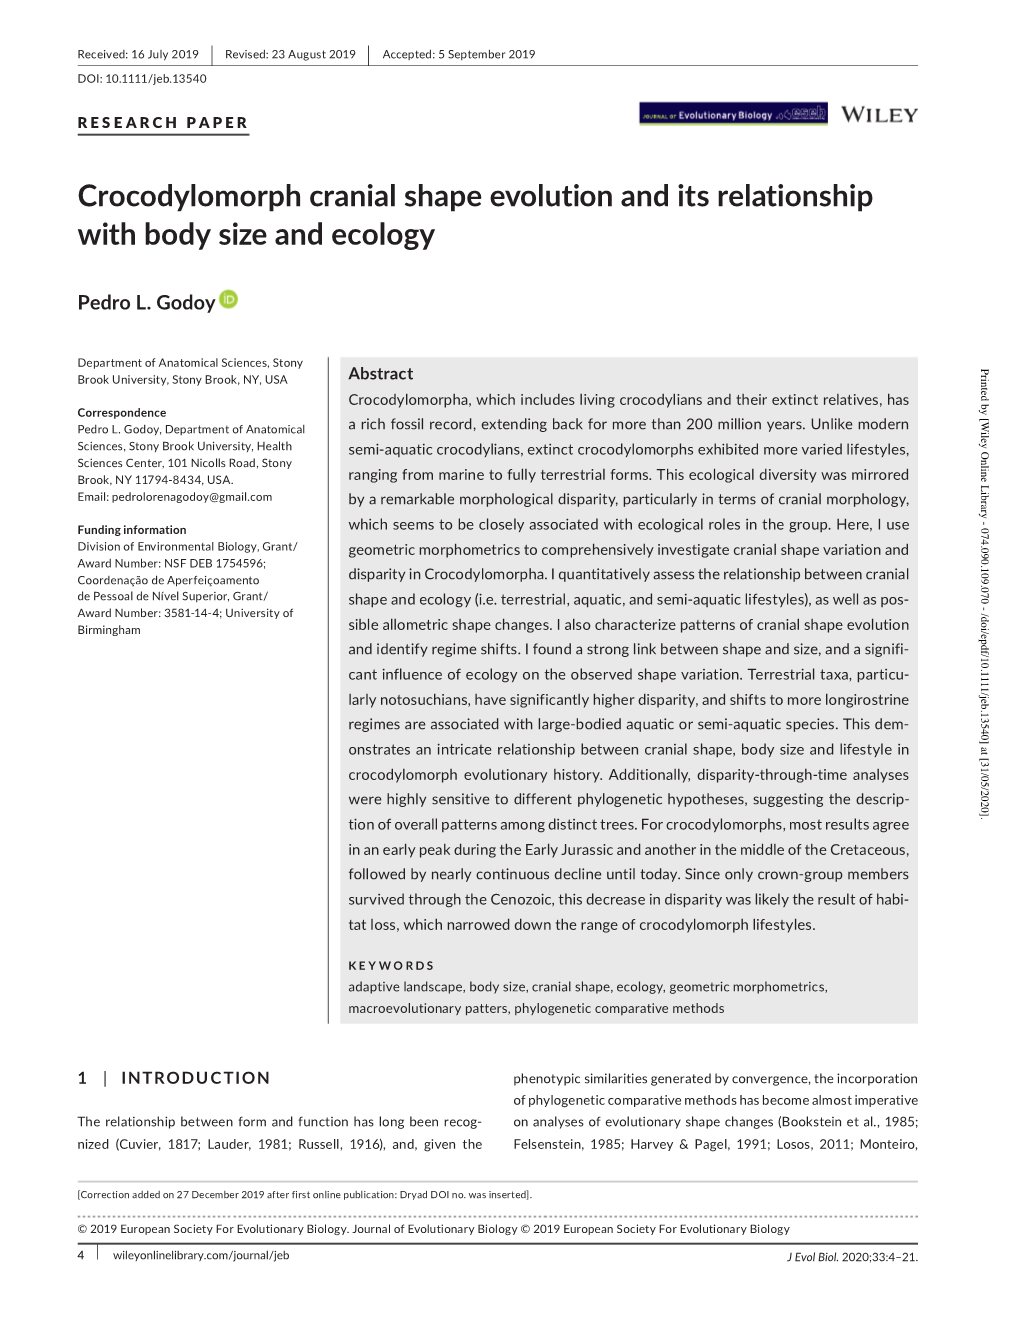 Crocodylomorph Cranial Shape Evolution and Its Relationship with Body Size and Ecology